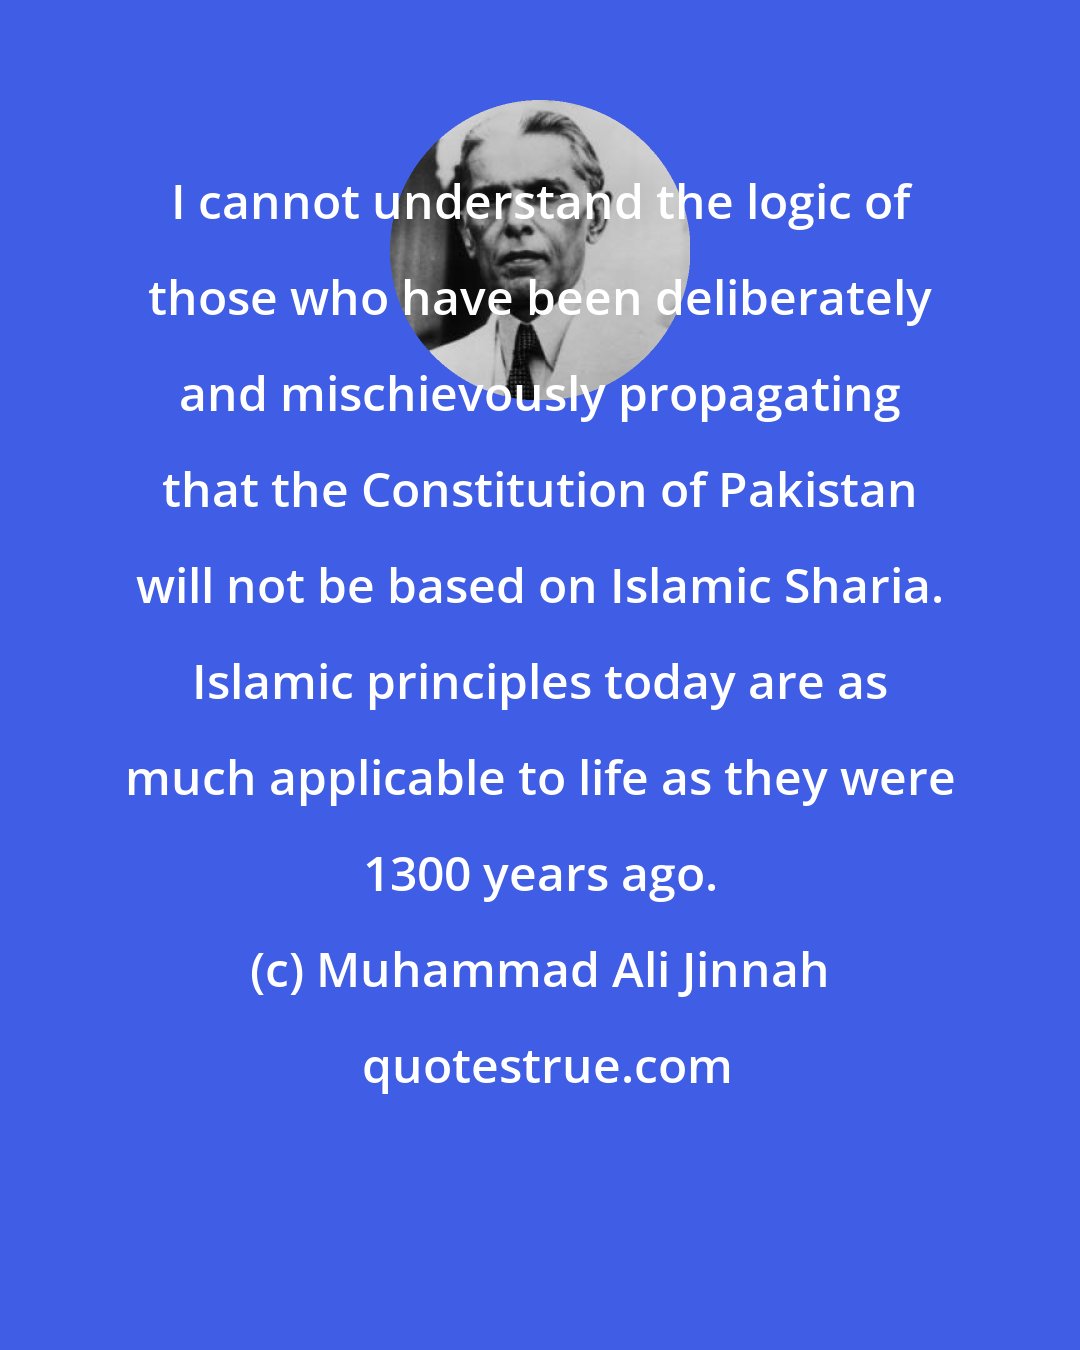 Muhammad Ali Jinnah: I cannot understand the logic of those who have been deliberately and mischievously propagating that the Constitution of Pakistan will not be based on Islamic Sharia. Islamic principles today are as much applicable to life as they were 1300 years ago.